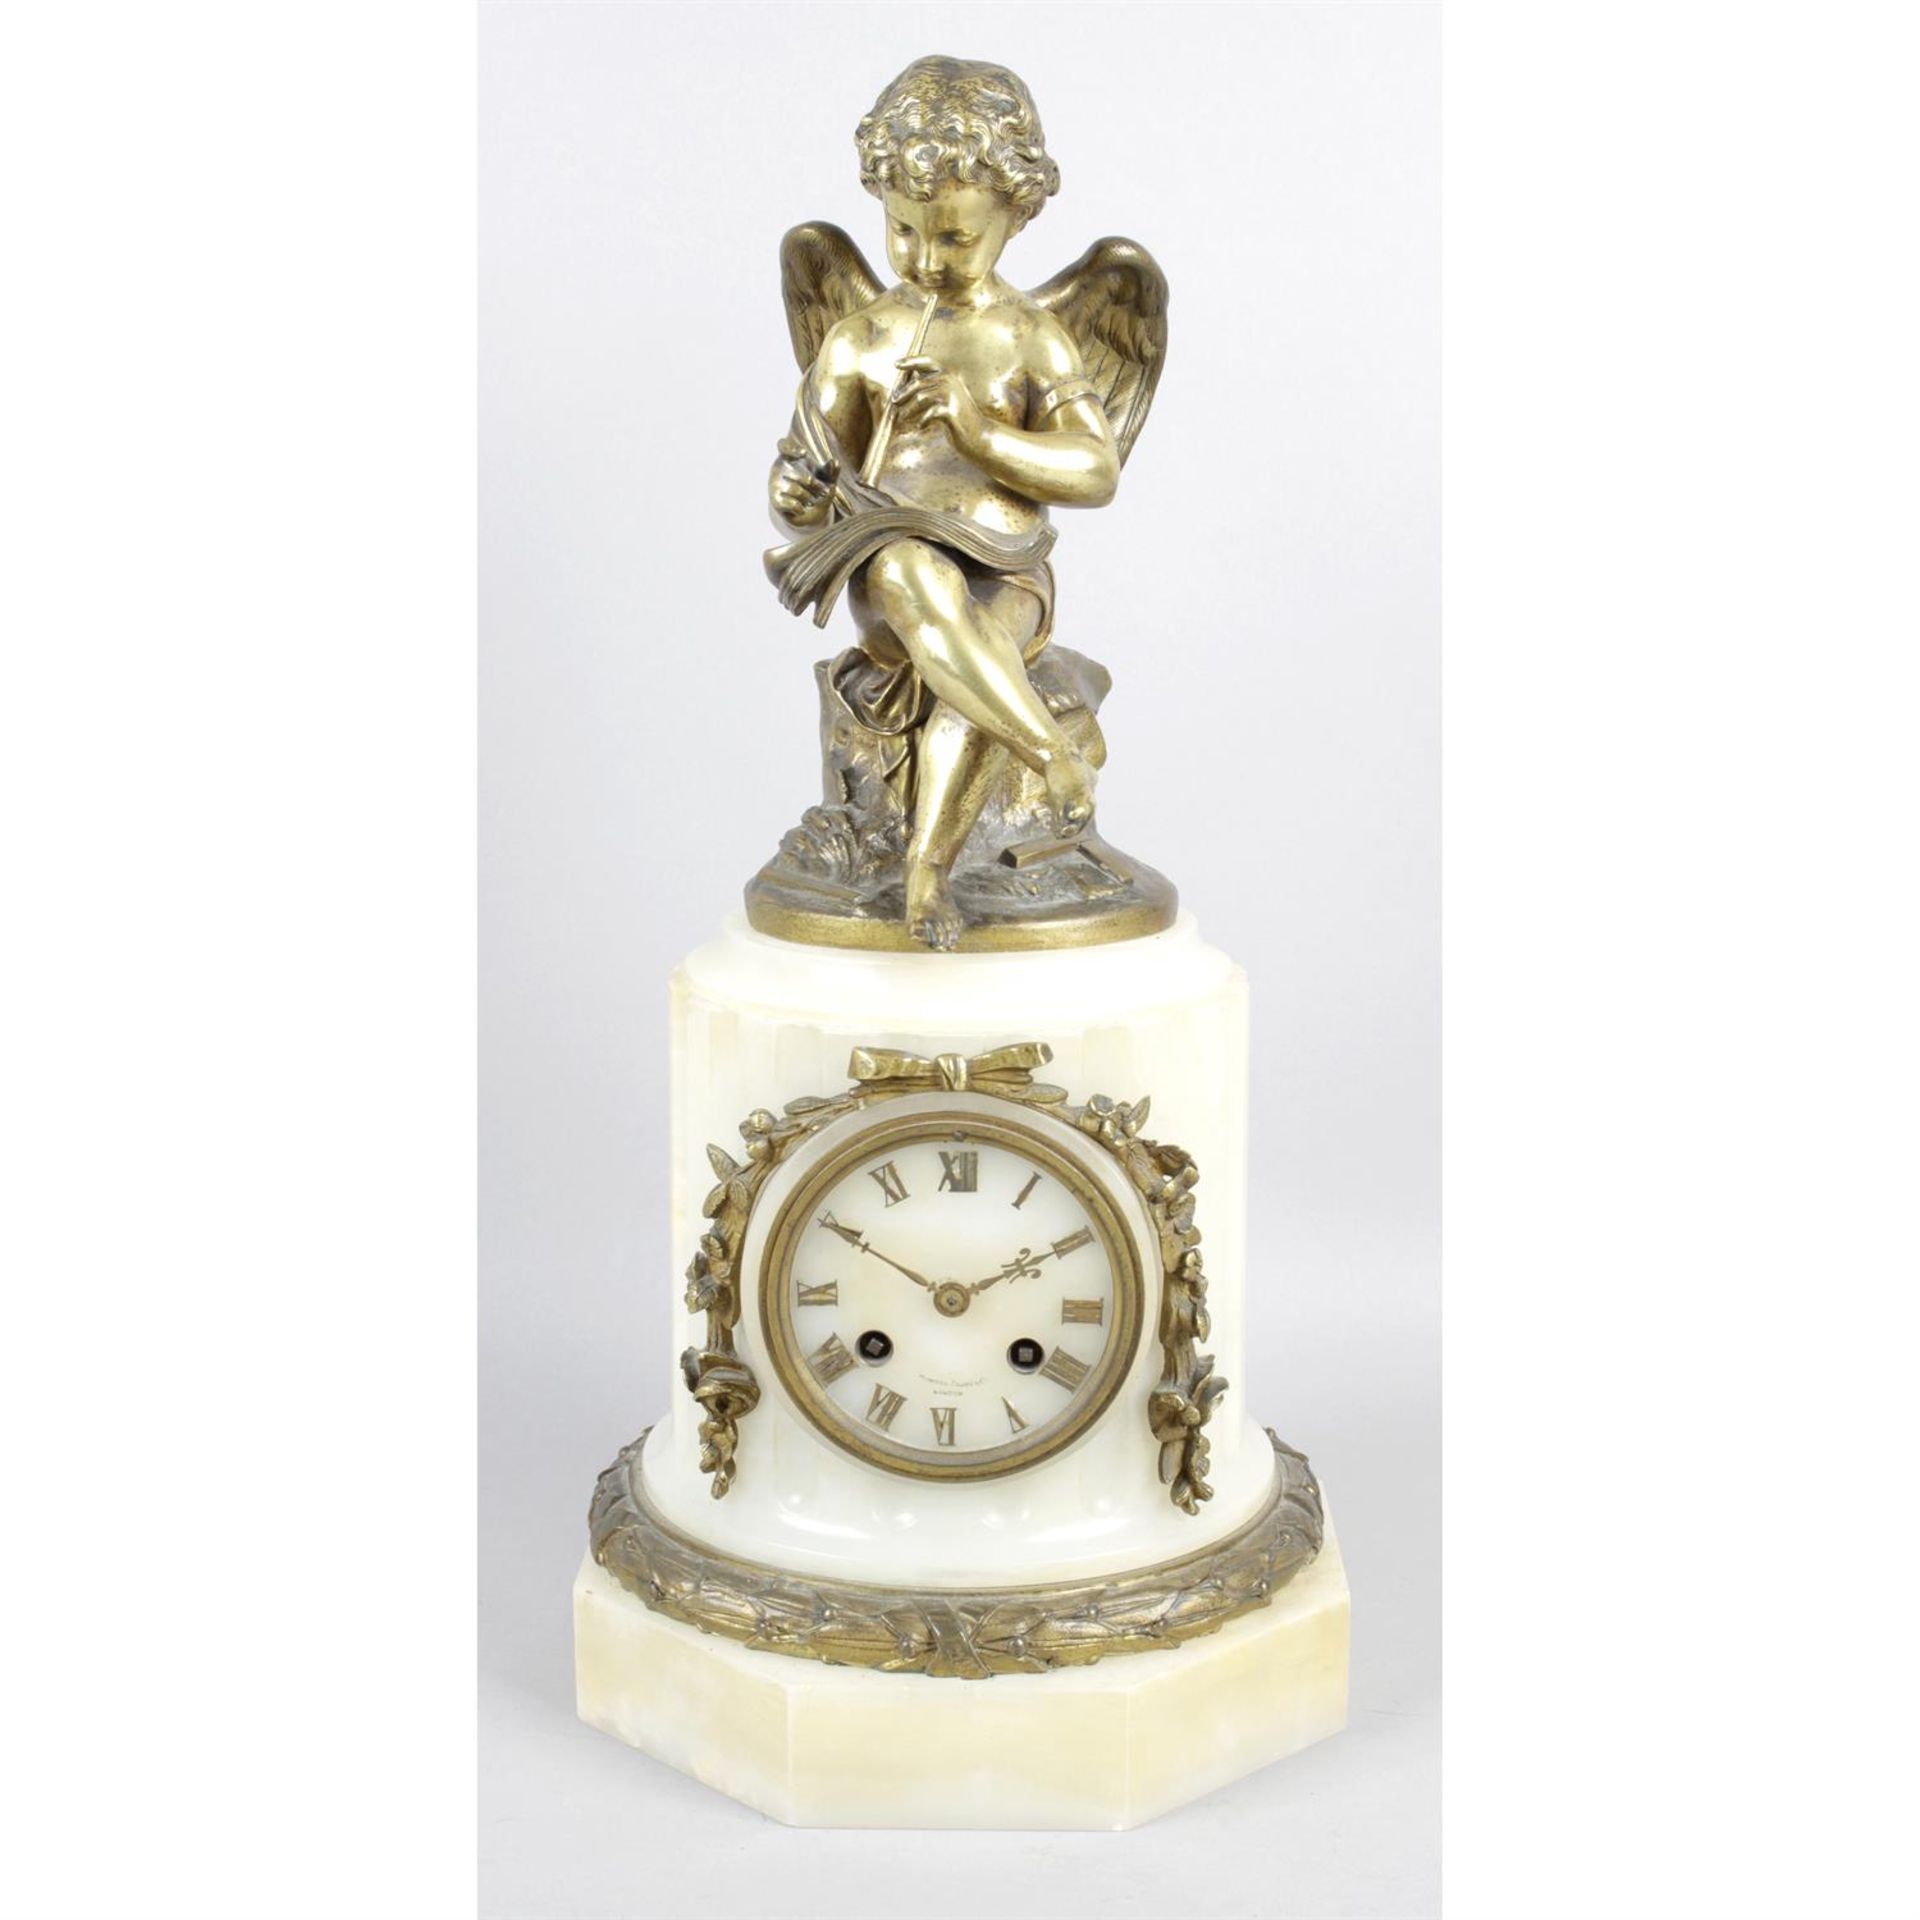 A late 19th century marble mantel clock.